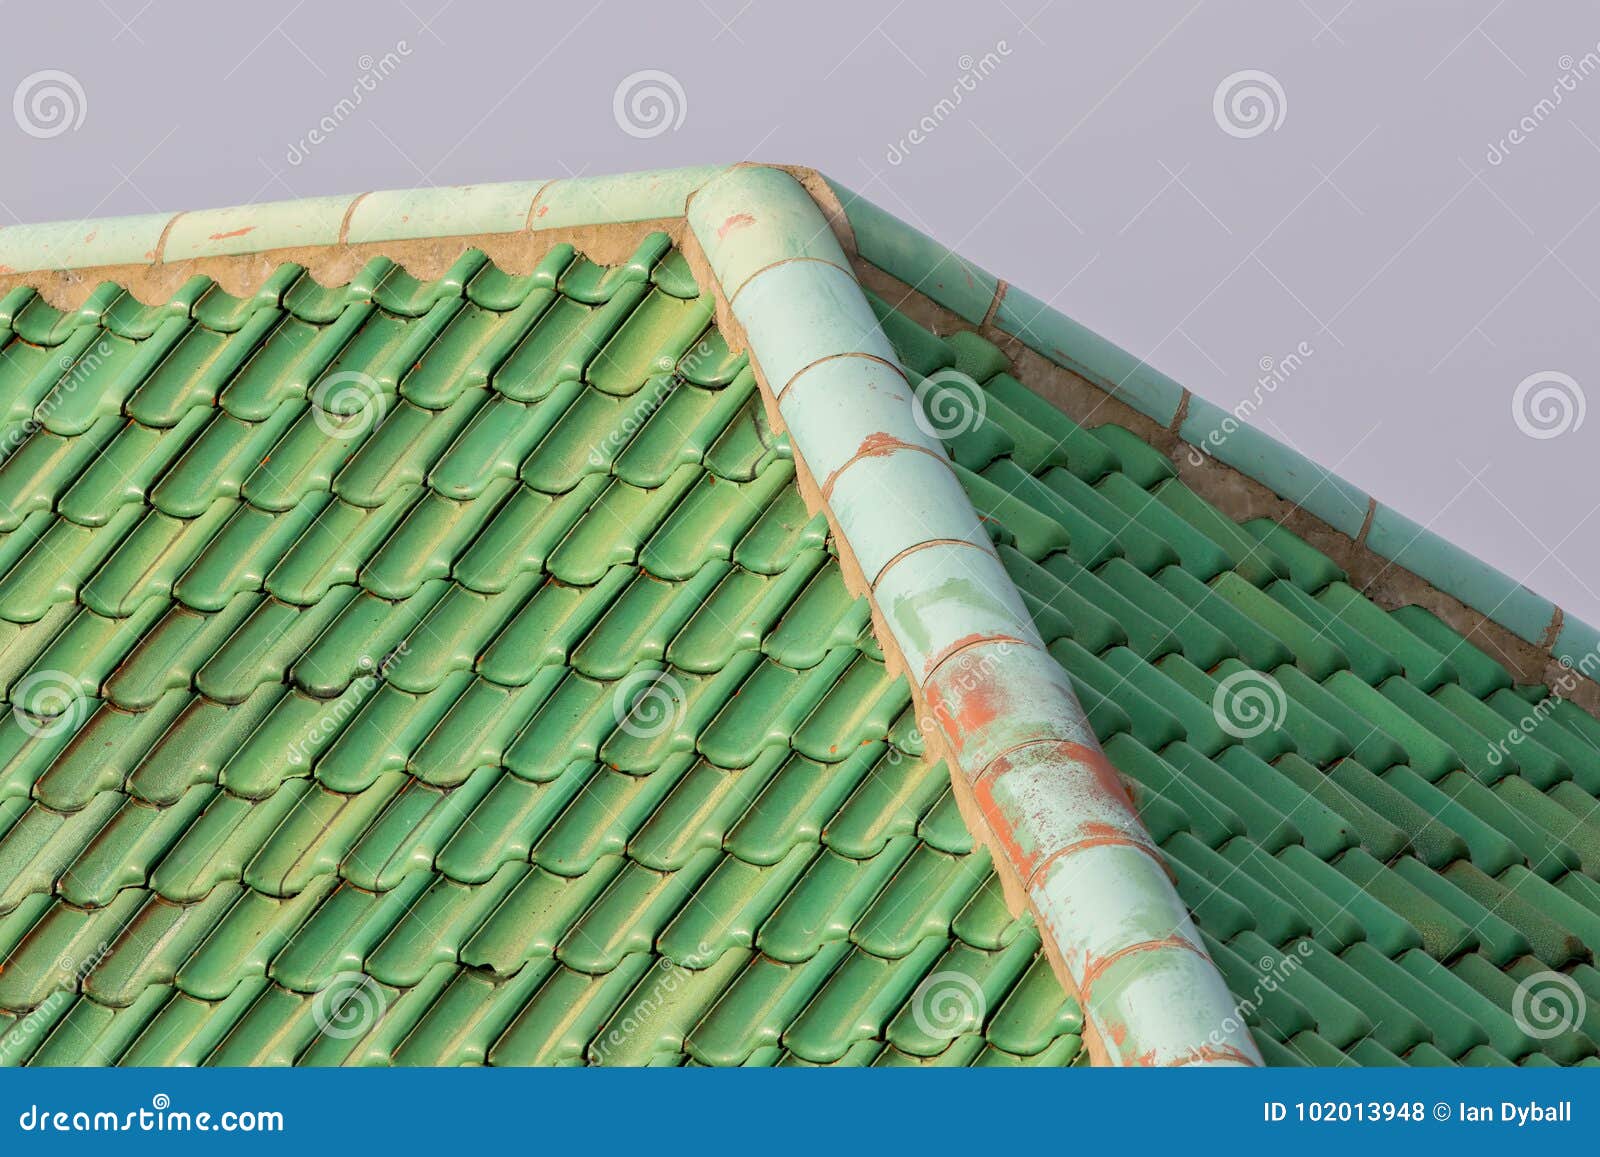 Green Colored Curved Clay Roof Tiles with Ridge Corner. Stock Photo